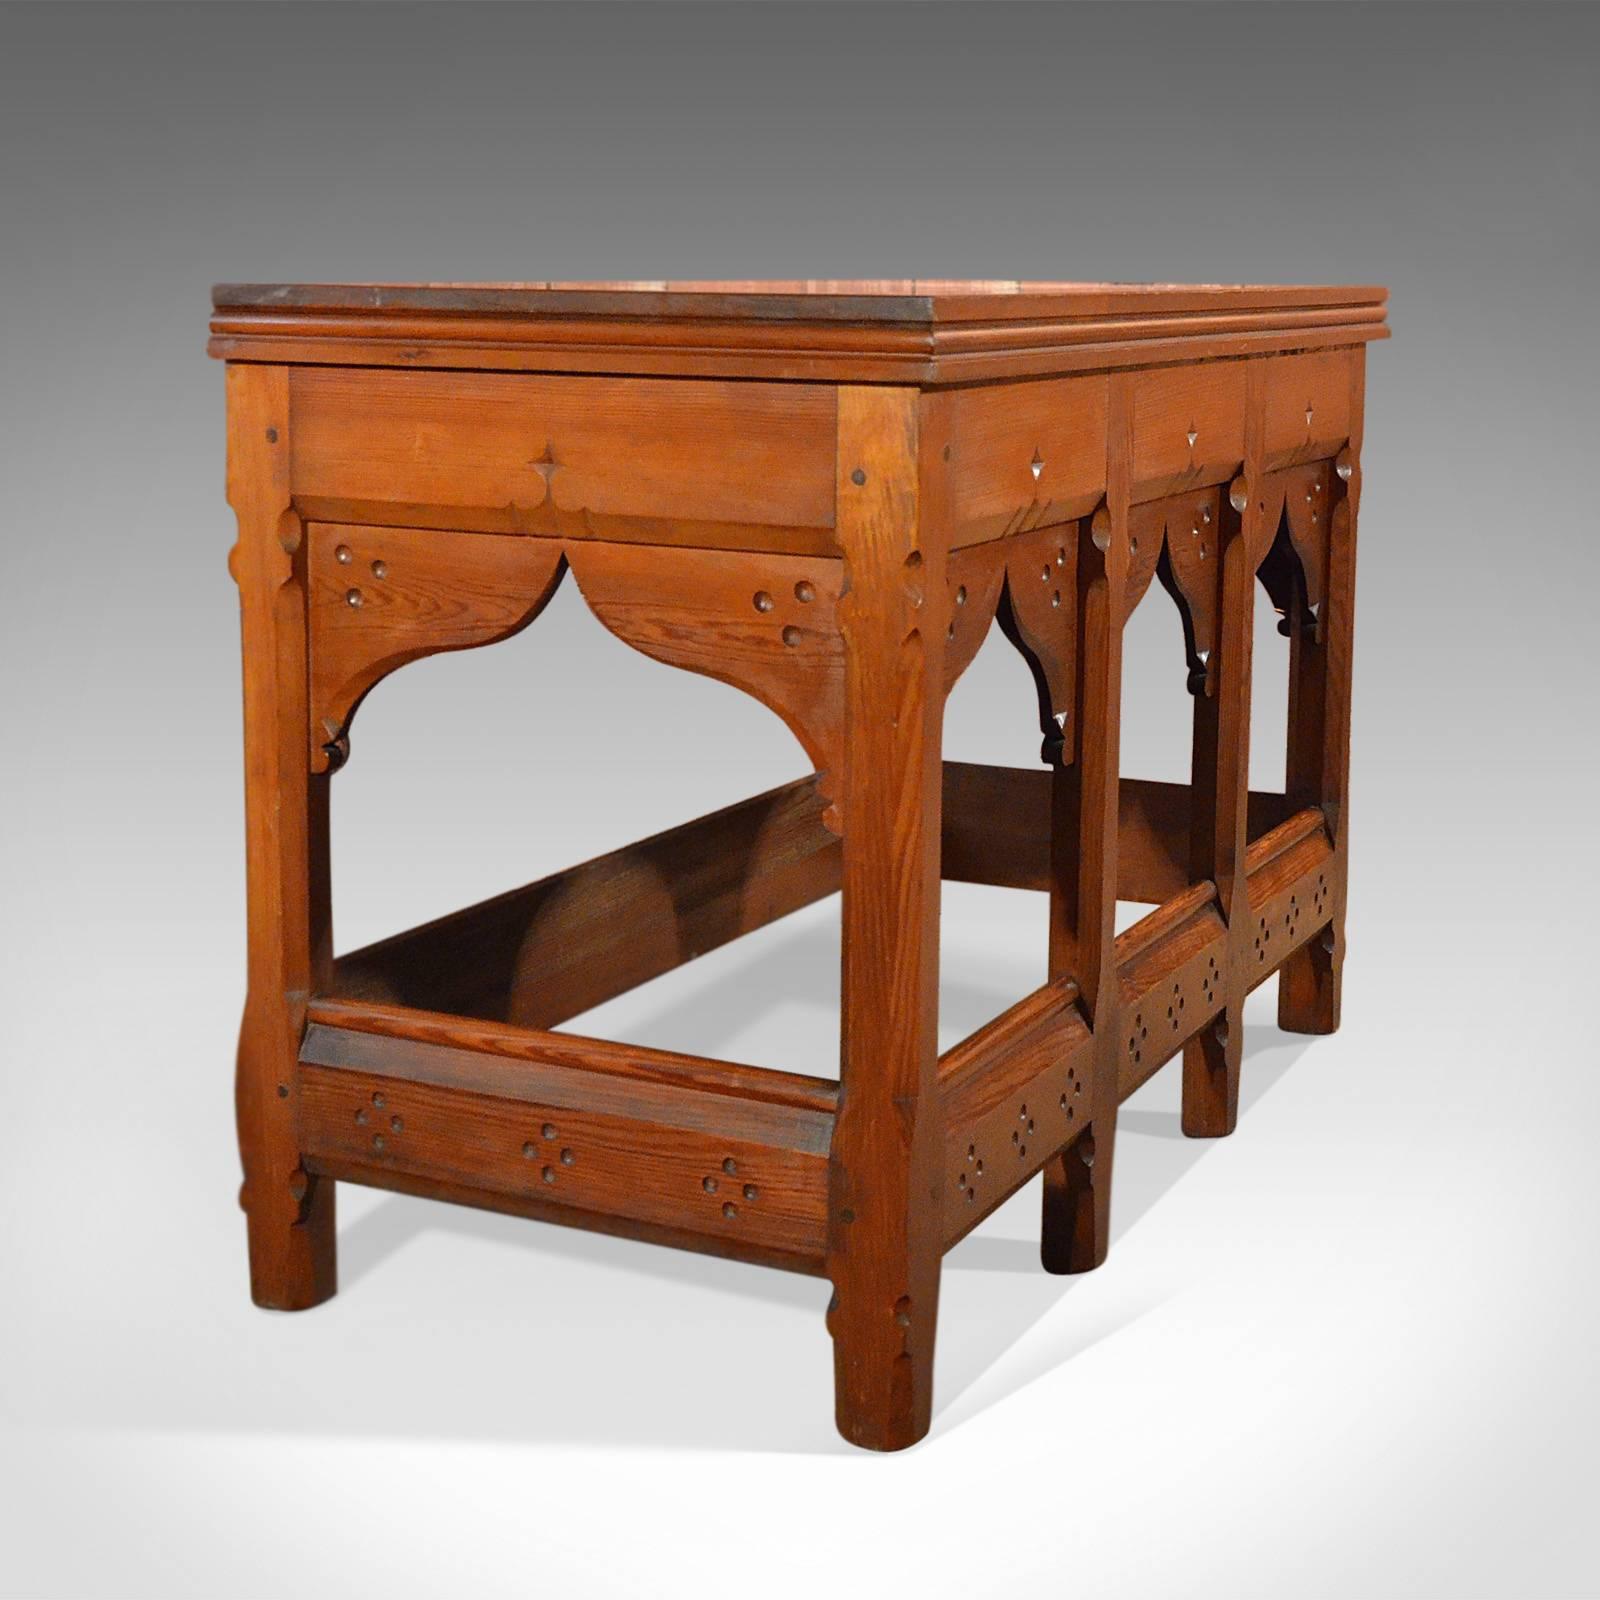 This is a large antique pitch pine serving table.

Substantial and honest this arts and crafts serving table has Pugin overtones with Gothic Revival style and artisan simplicity in the construction and design.

The pitch pine has an almost